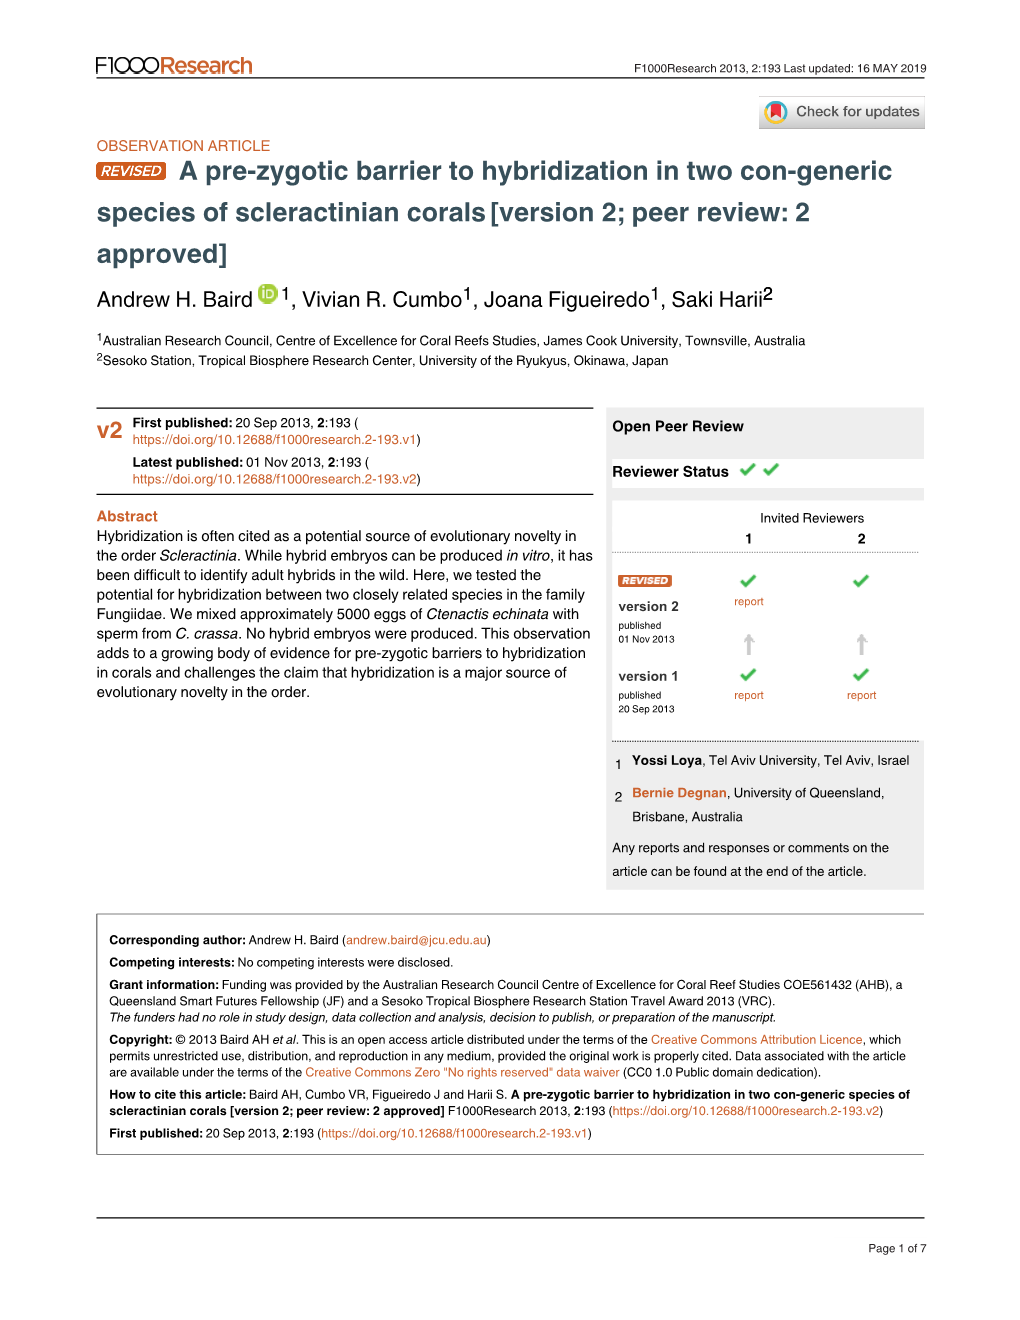 A Pre-Zygotic Barrier to Hybridization in Two Con-Generic Species of Scleractinian Corals [Version 2; Peer Review: 2 Approved] Andrew H